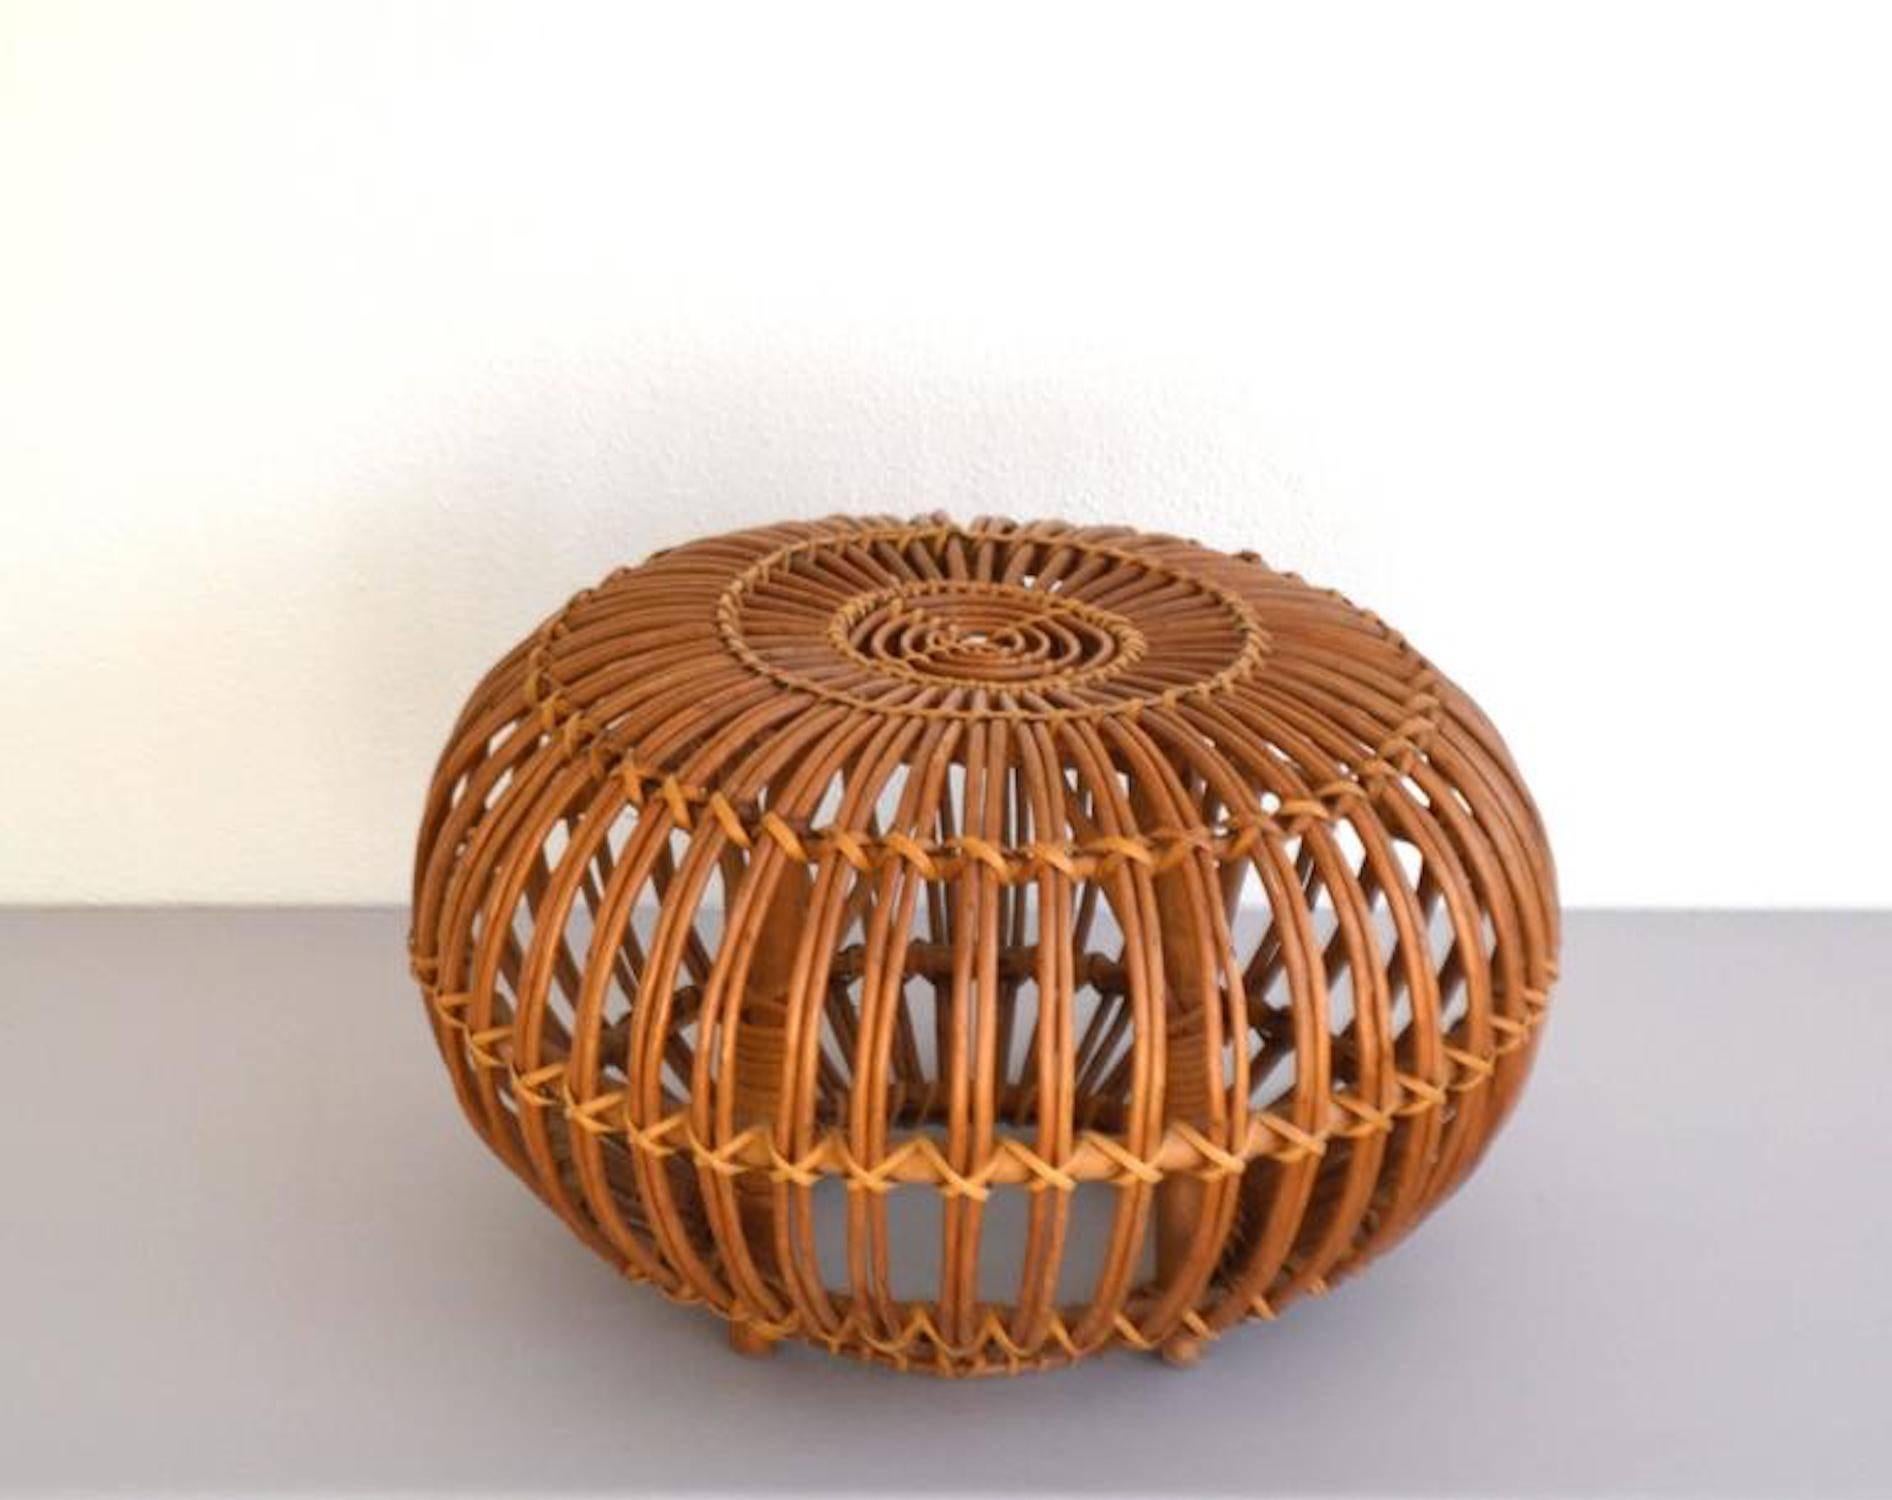 Striking Italian woven rattan stool, circa 1950s-1960s. This iconic midcentury ottoman or occasional table is in original excellent condition with a wonderful aged patina.